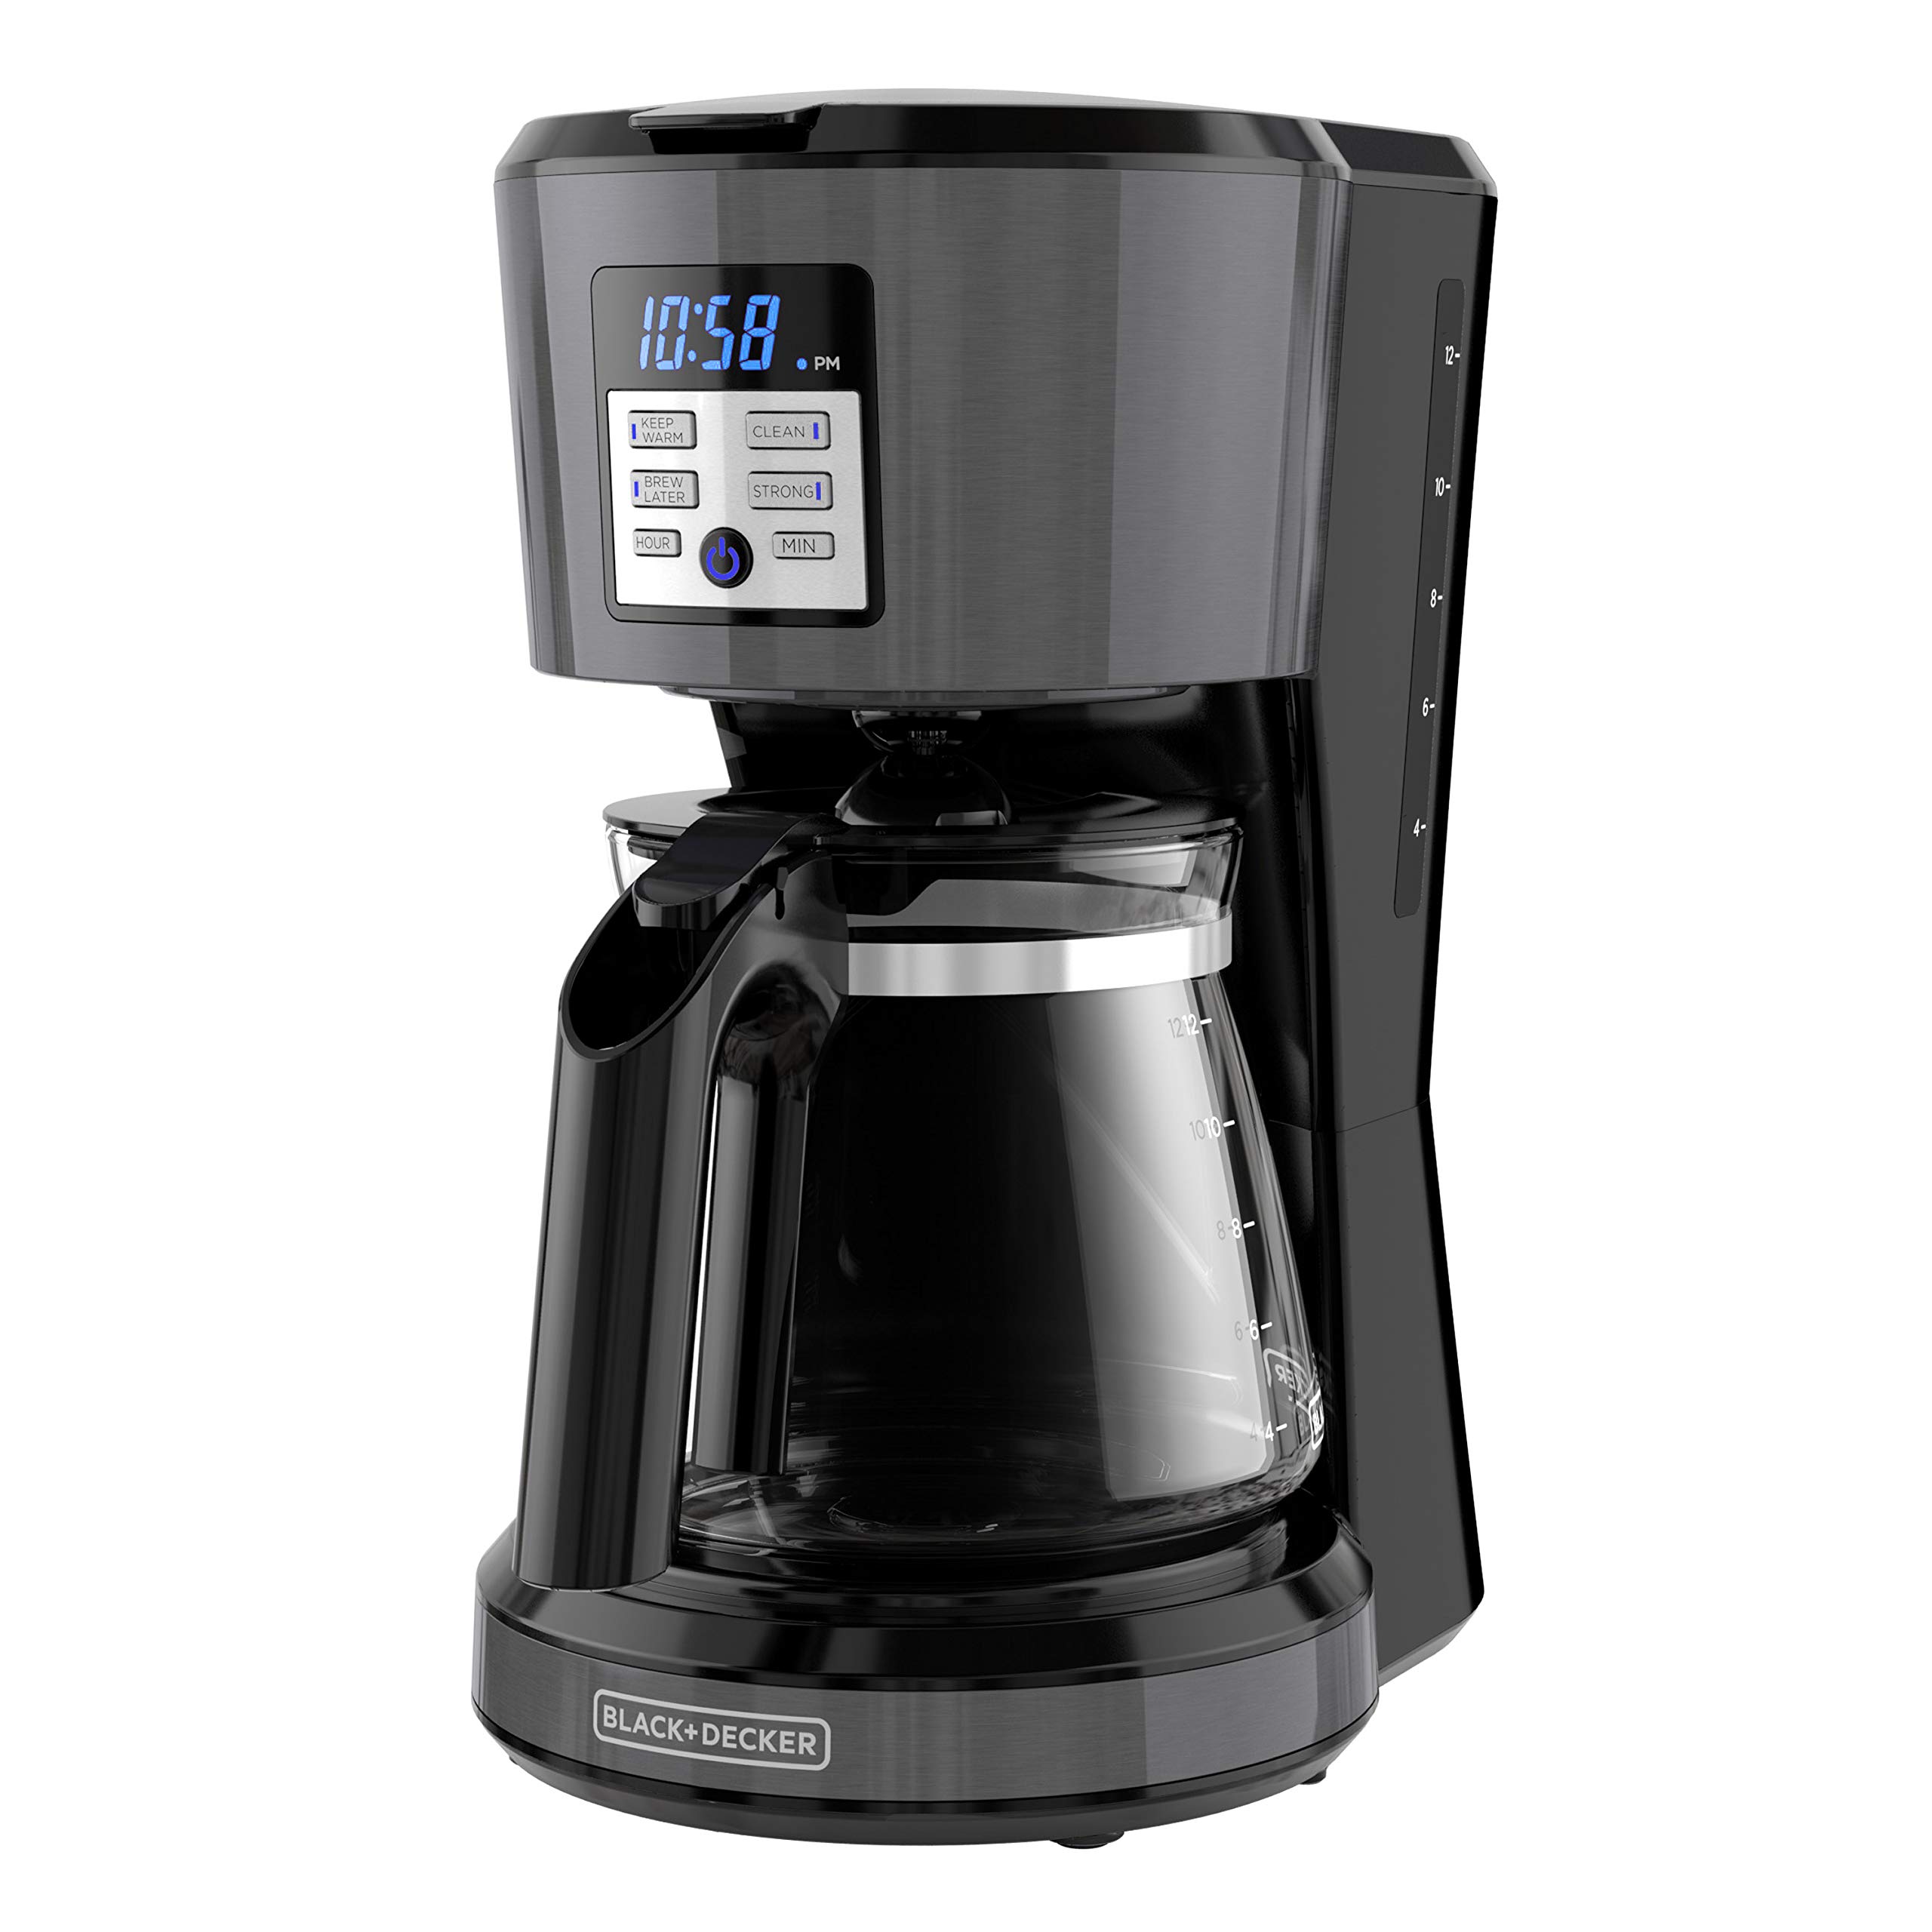 12 Cup programmable coffee maker